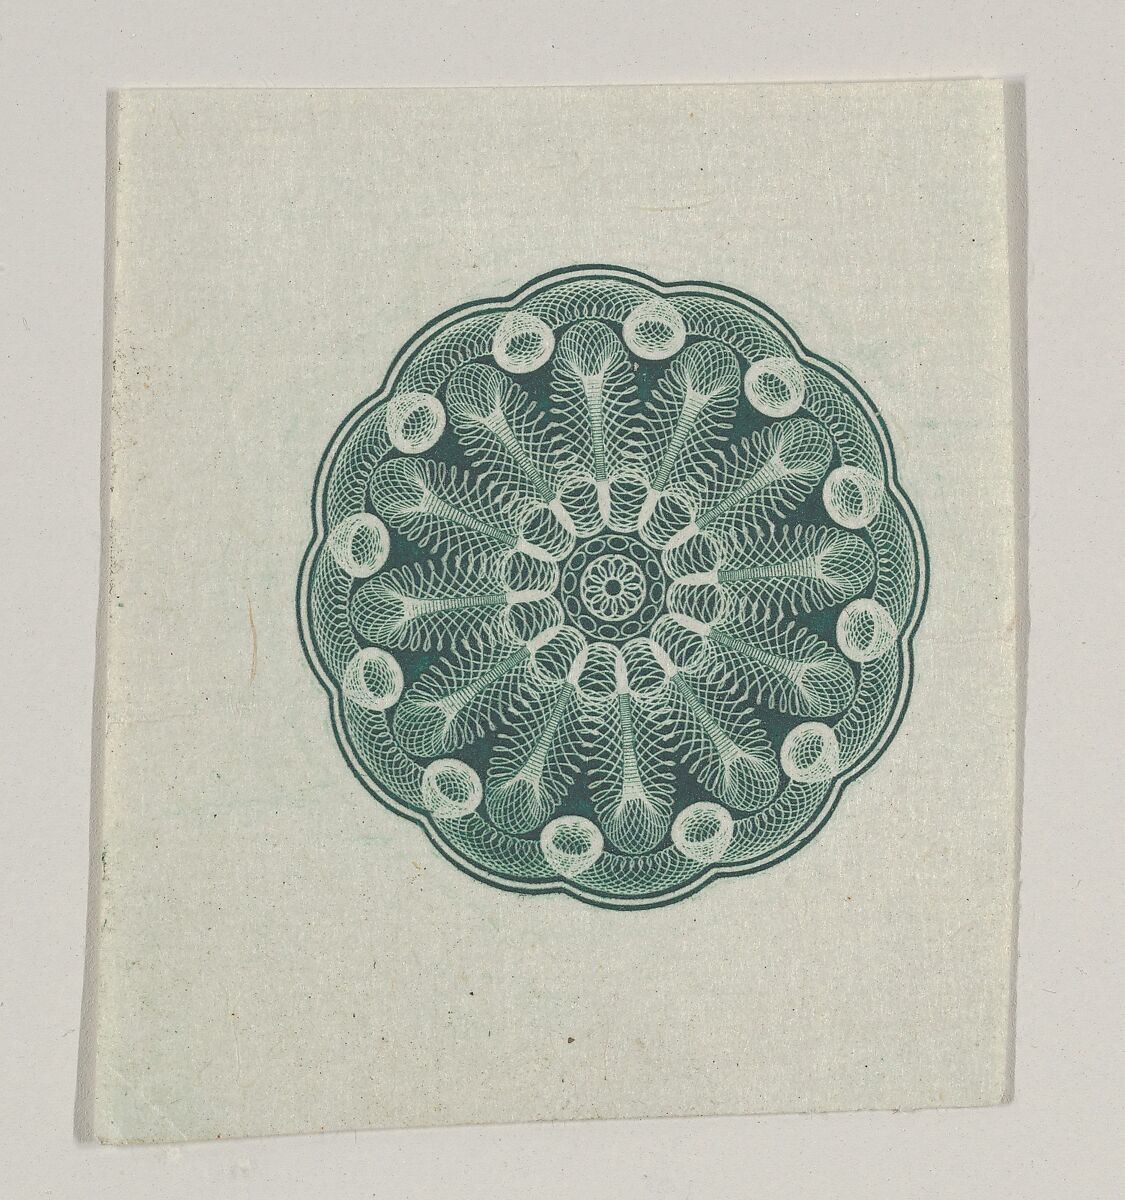 Banknote motif: small circular ornament containing floral lathe work, Associated with Cyrus Durand (American, 1787–1868), Engraving, printed in green ink; proof 